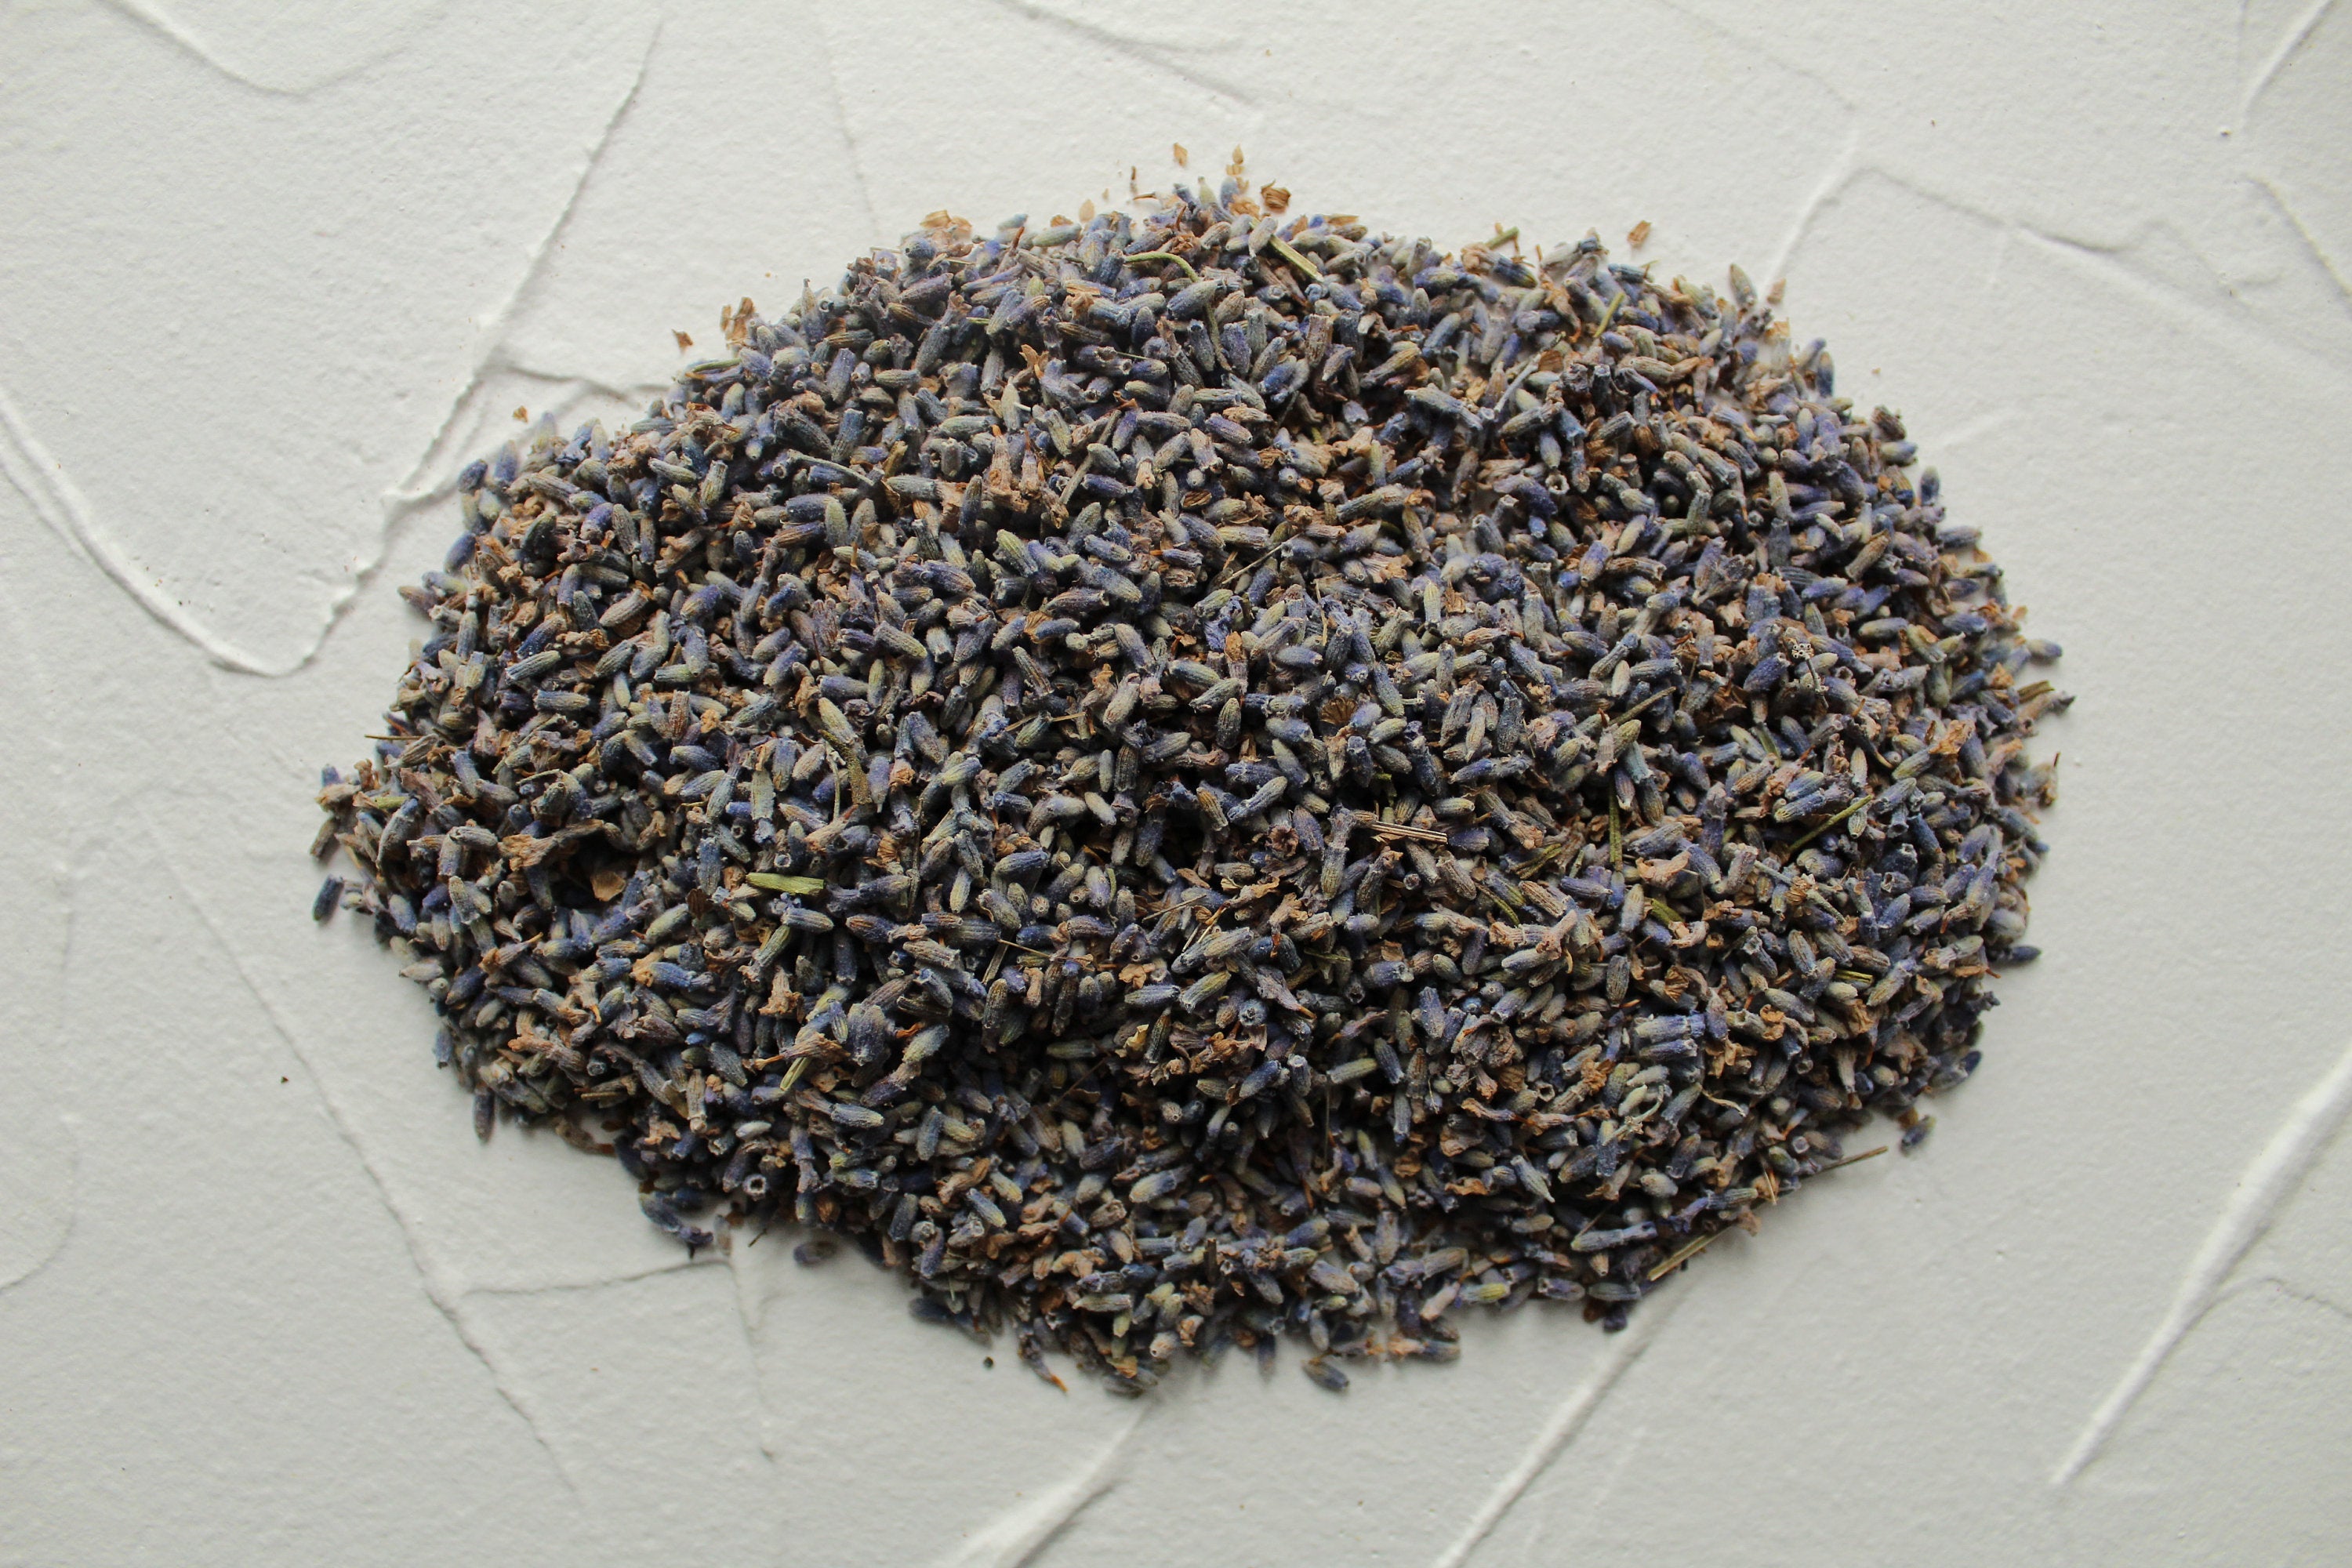 250 grams of Blue Lavender flowers, High Quality, Natural, Organic, Biodegradable, Wedding, Craft, Edible, Confetti, Toss, Lavender buds